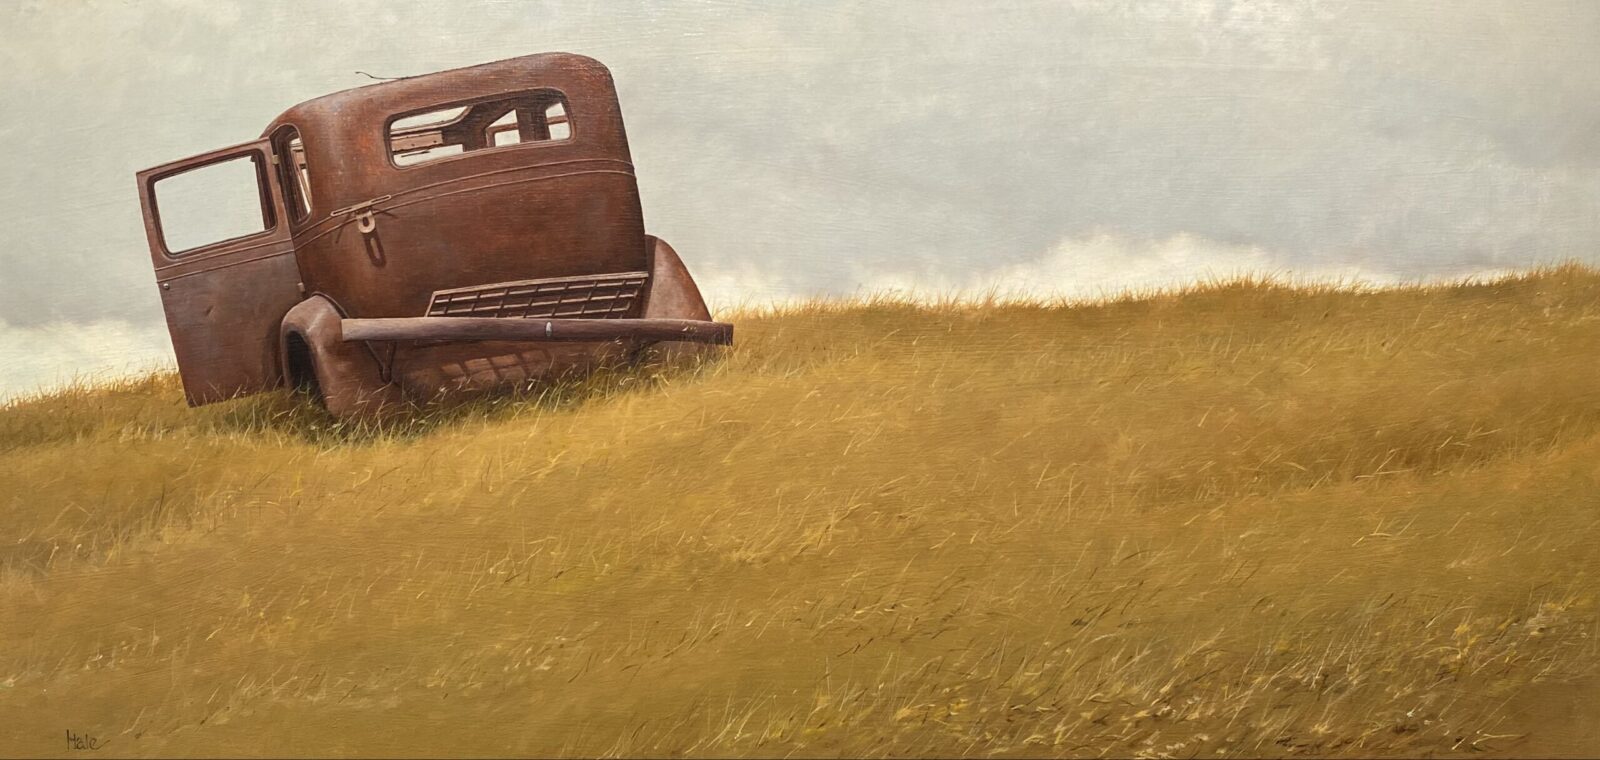 A painting of a rusty truck in a grassy field.